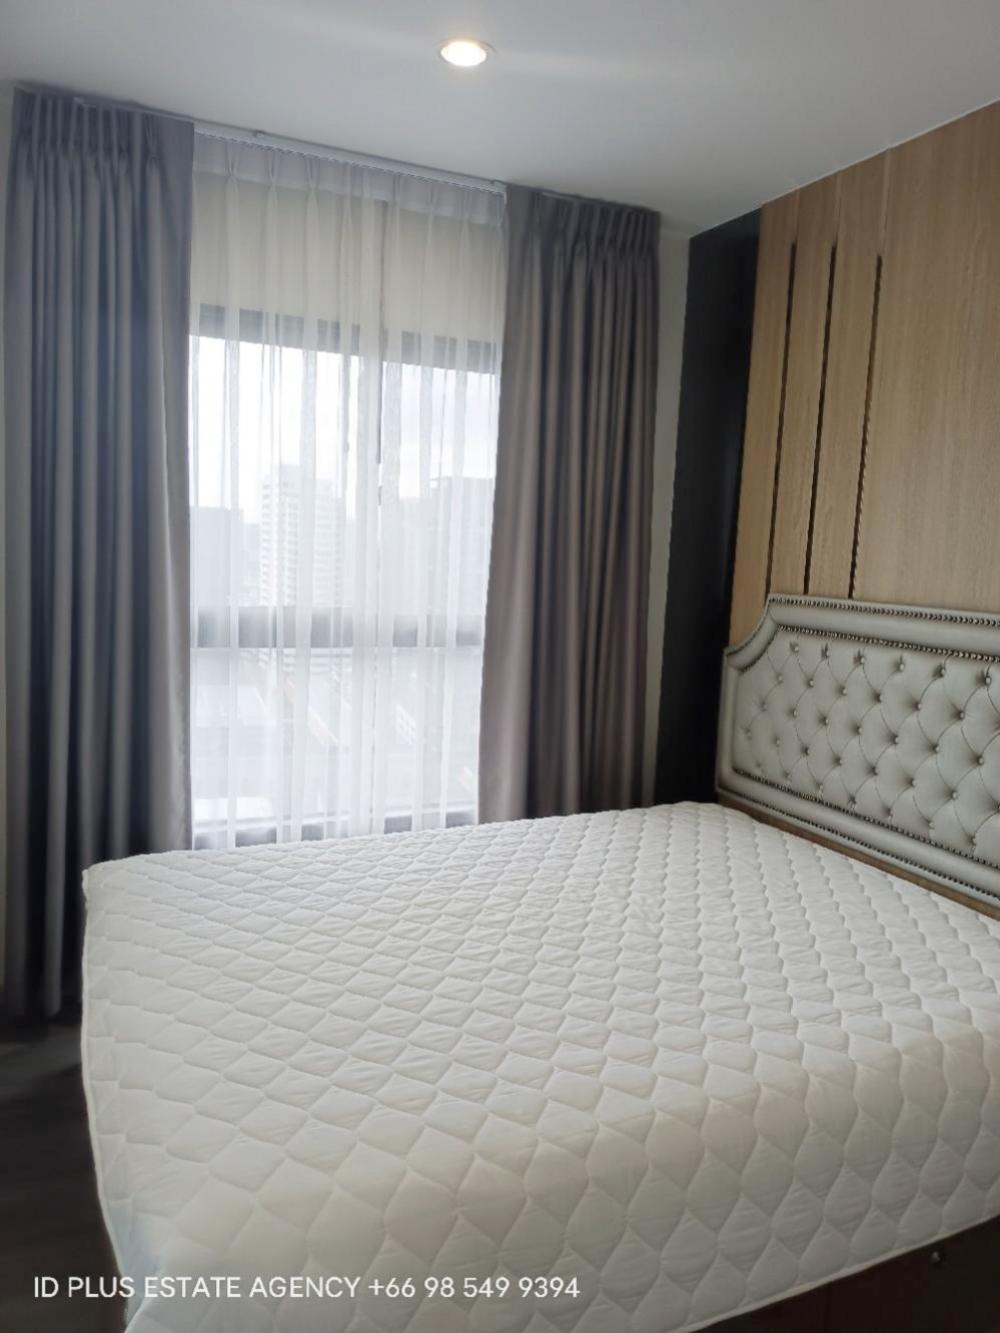 For RentCondoPinklao, Charansanitwong : The Parkland Charan - Pinklao Condo for rent : 1 bedroom for 30 sqm. on 19th floor.with fully furnished and electrical appliances.Next to MRT Bangyikhan.Rental only for 13,000 / m.